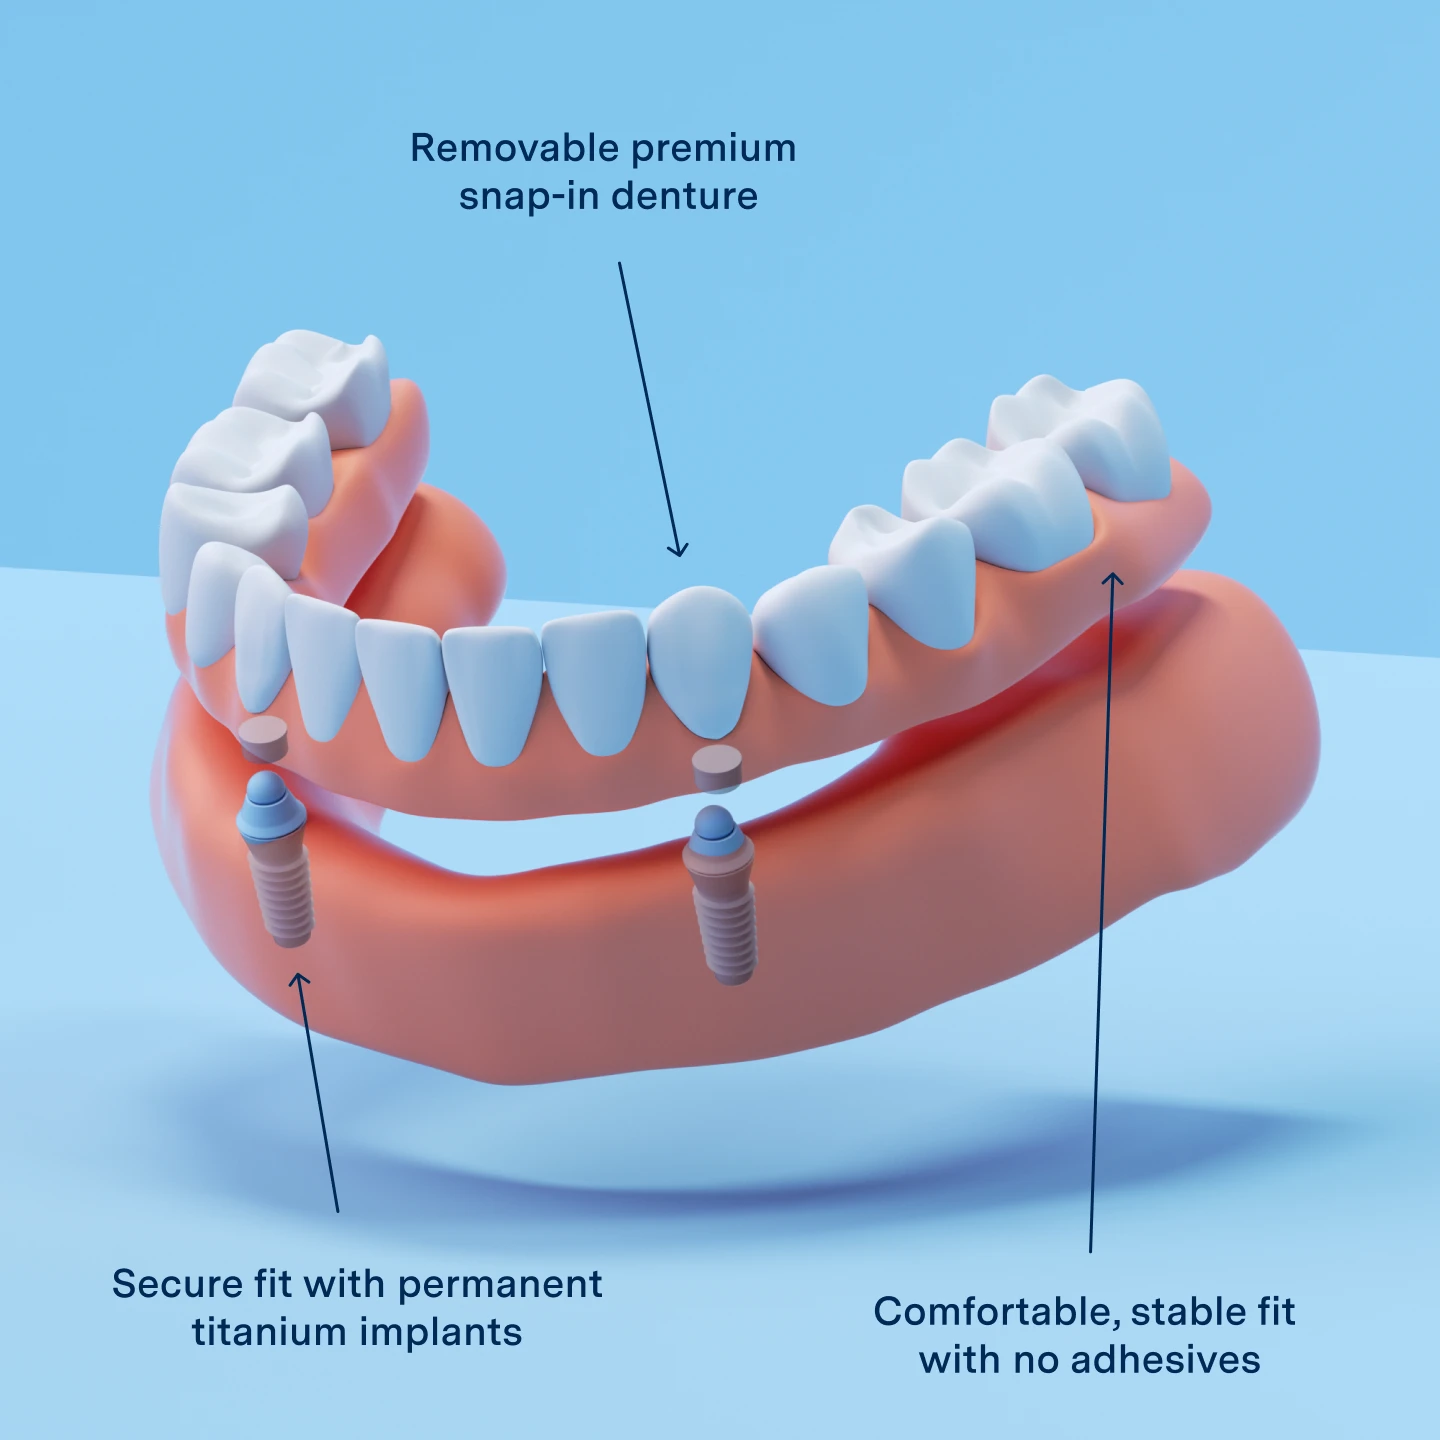 Graphic of Implant dentures, showing the features which include removeable premium snap-in denture, with the secure fit of permanent titanium implants, designed for a comfortable, stable fit with no adhesives.